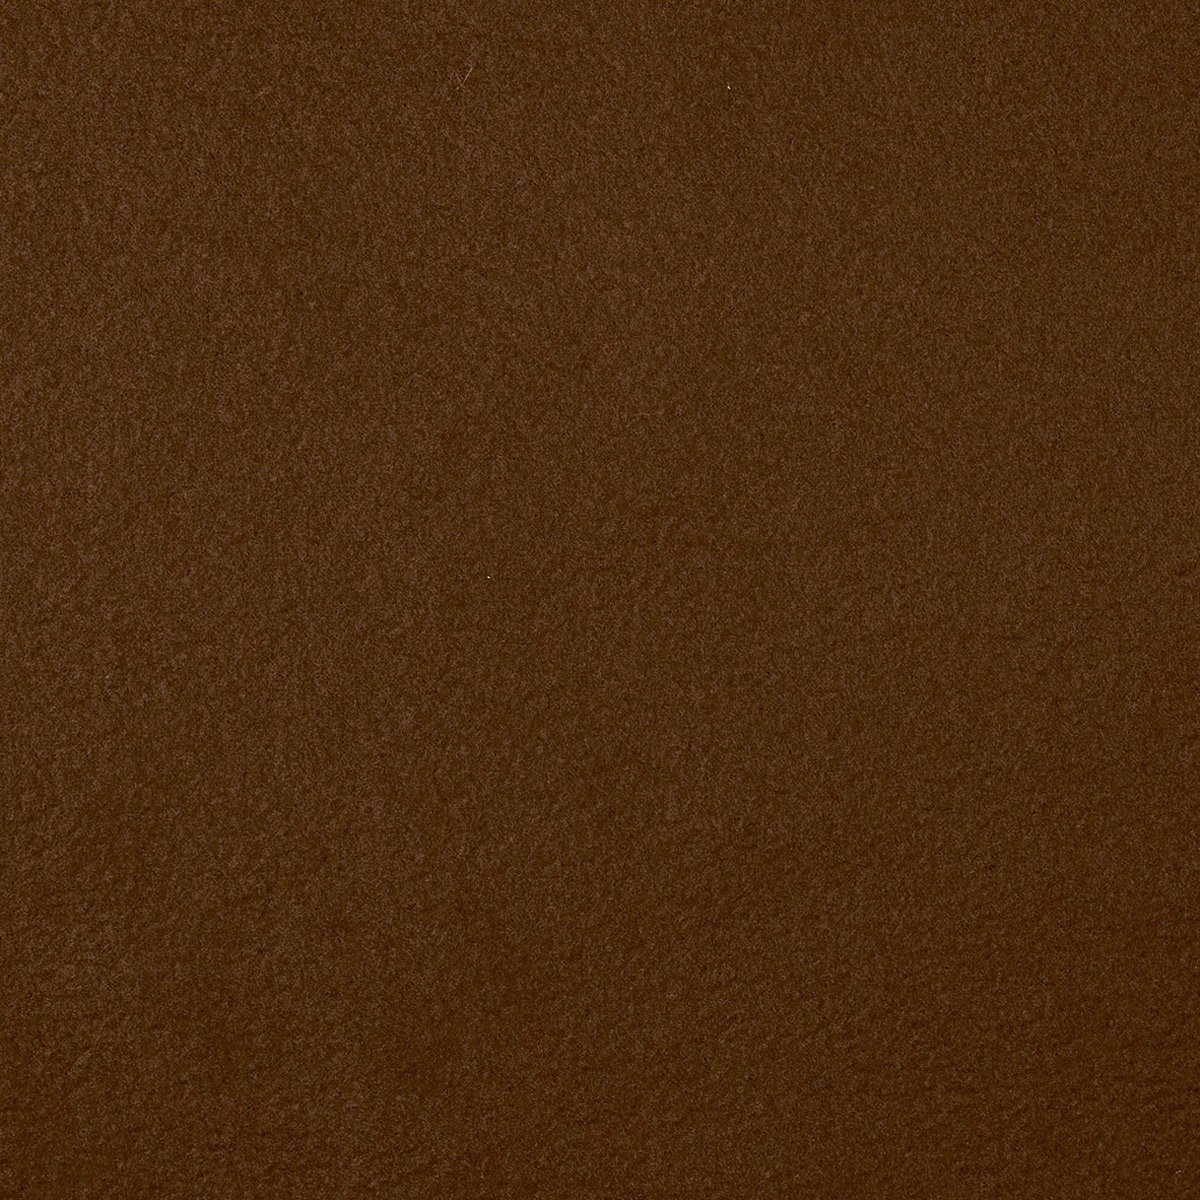 Sherpa-Backed Distressed Vinyl Coating - Distressd Brown/Ivory